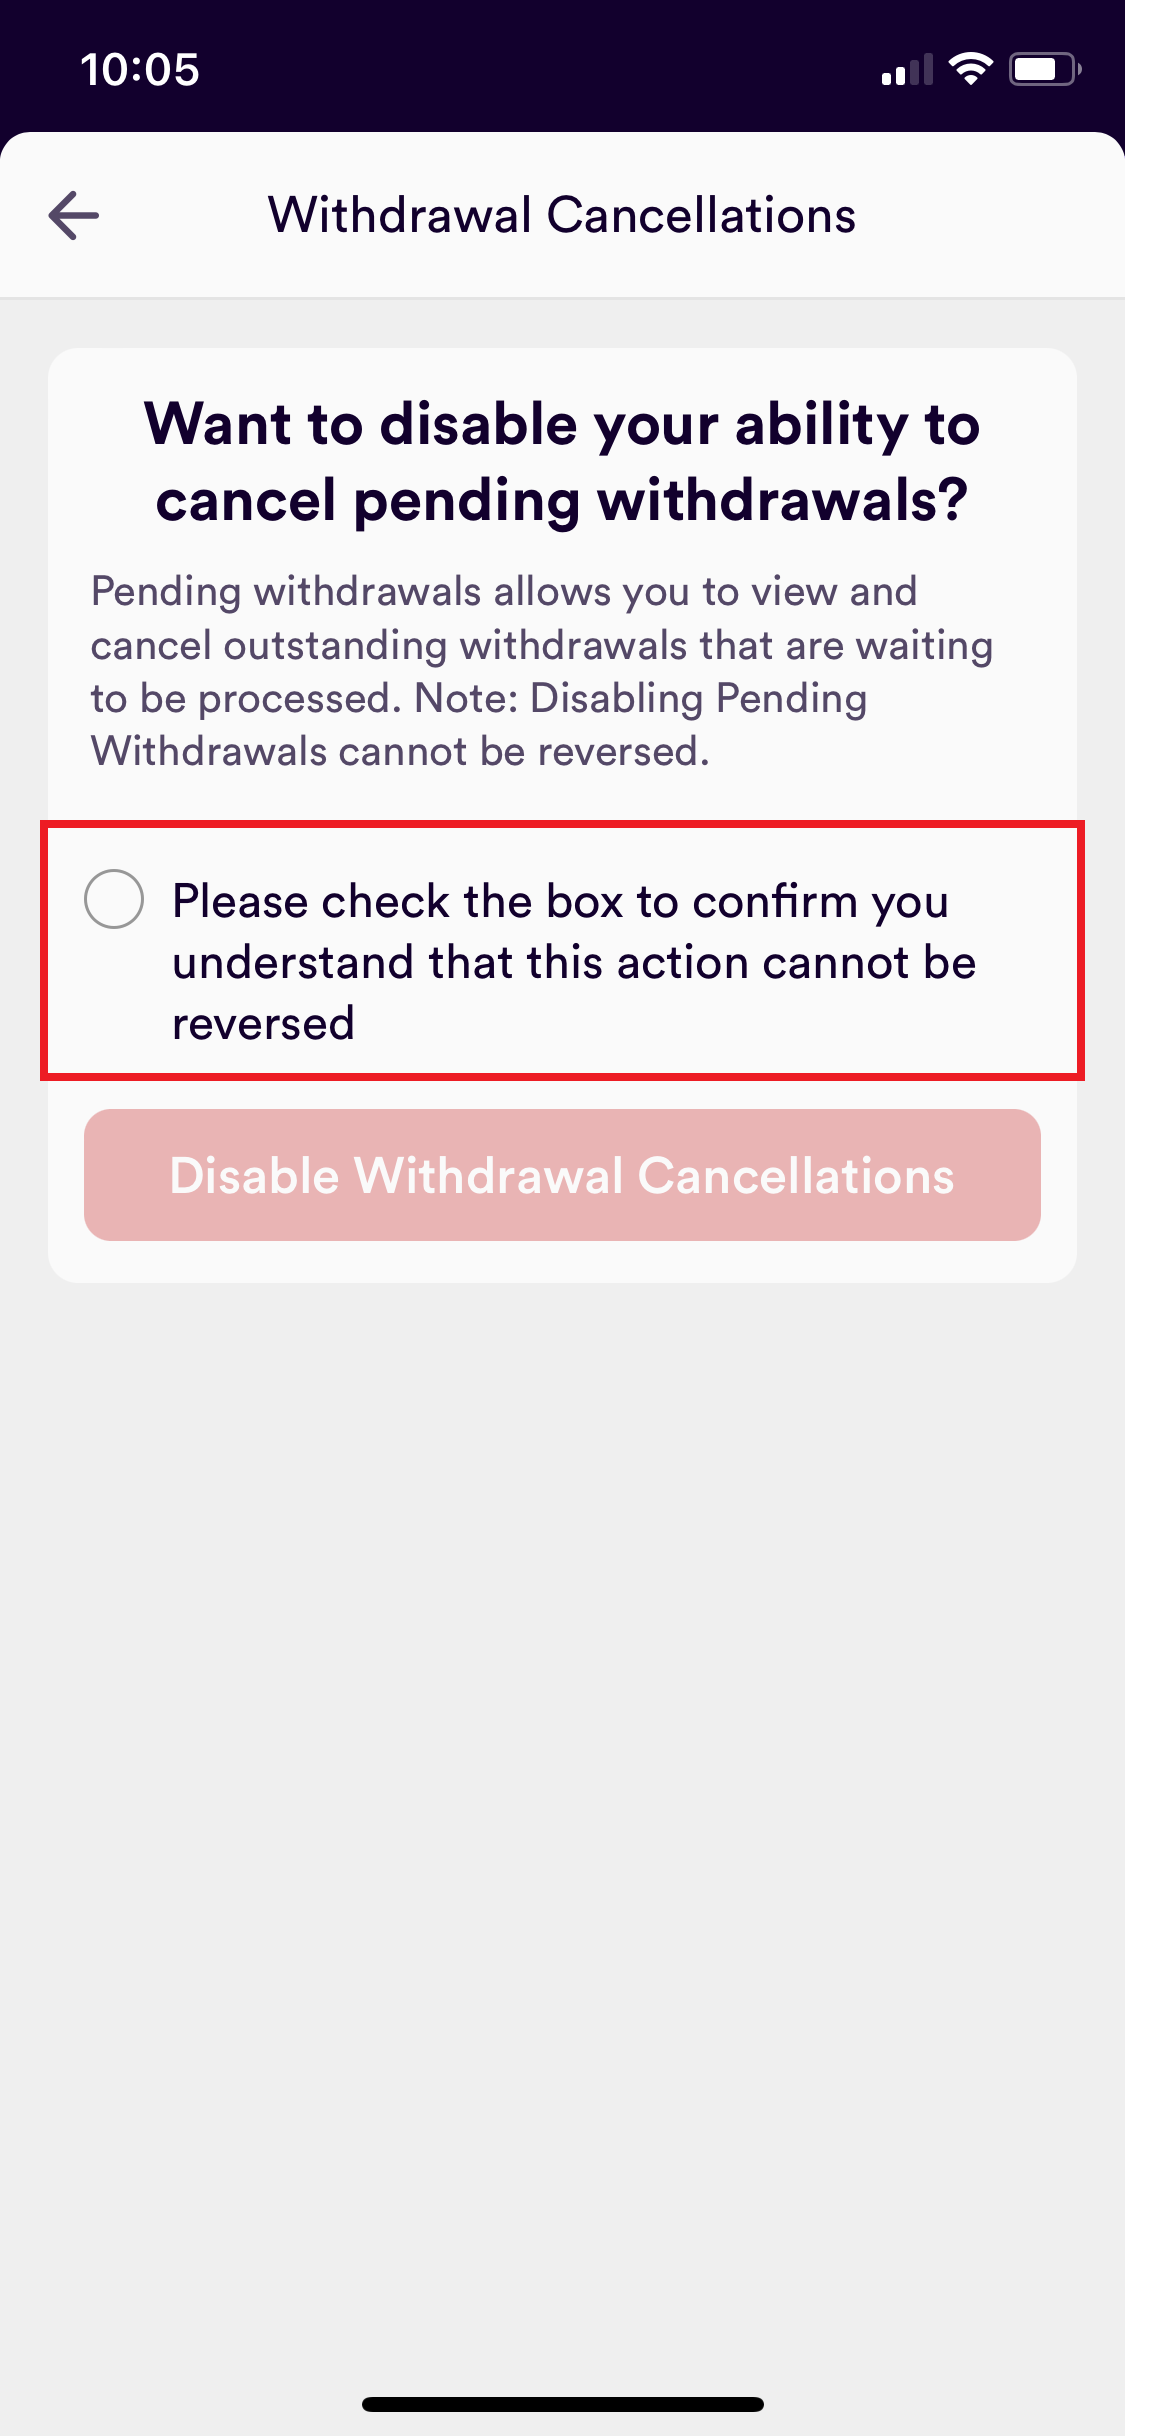 Withdrawal_Cancellations_2.png